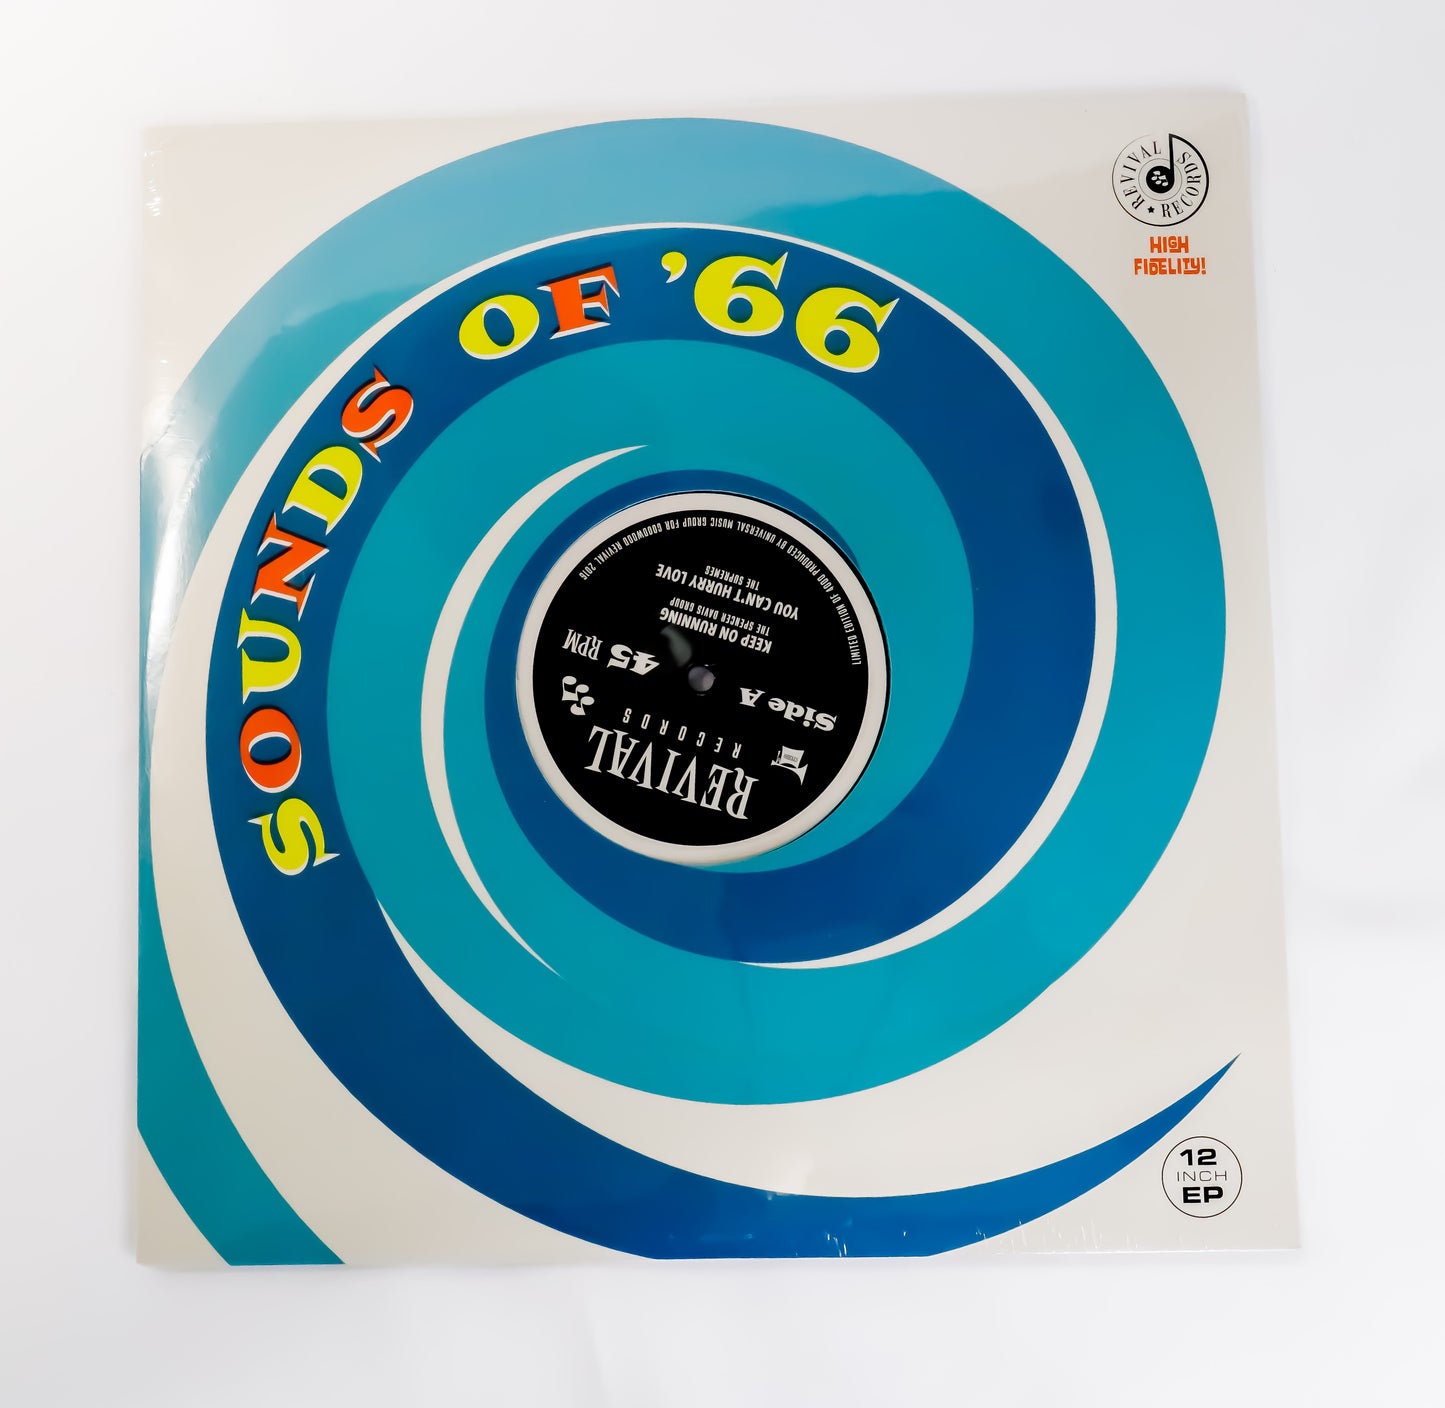 Sounds of '66 Charity EP